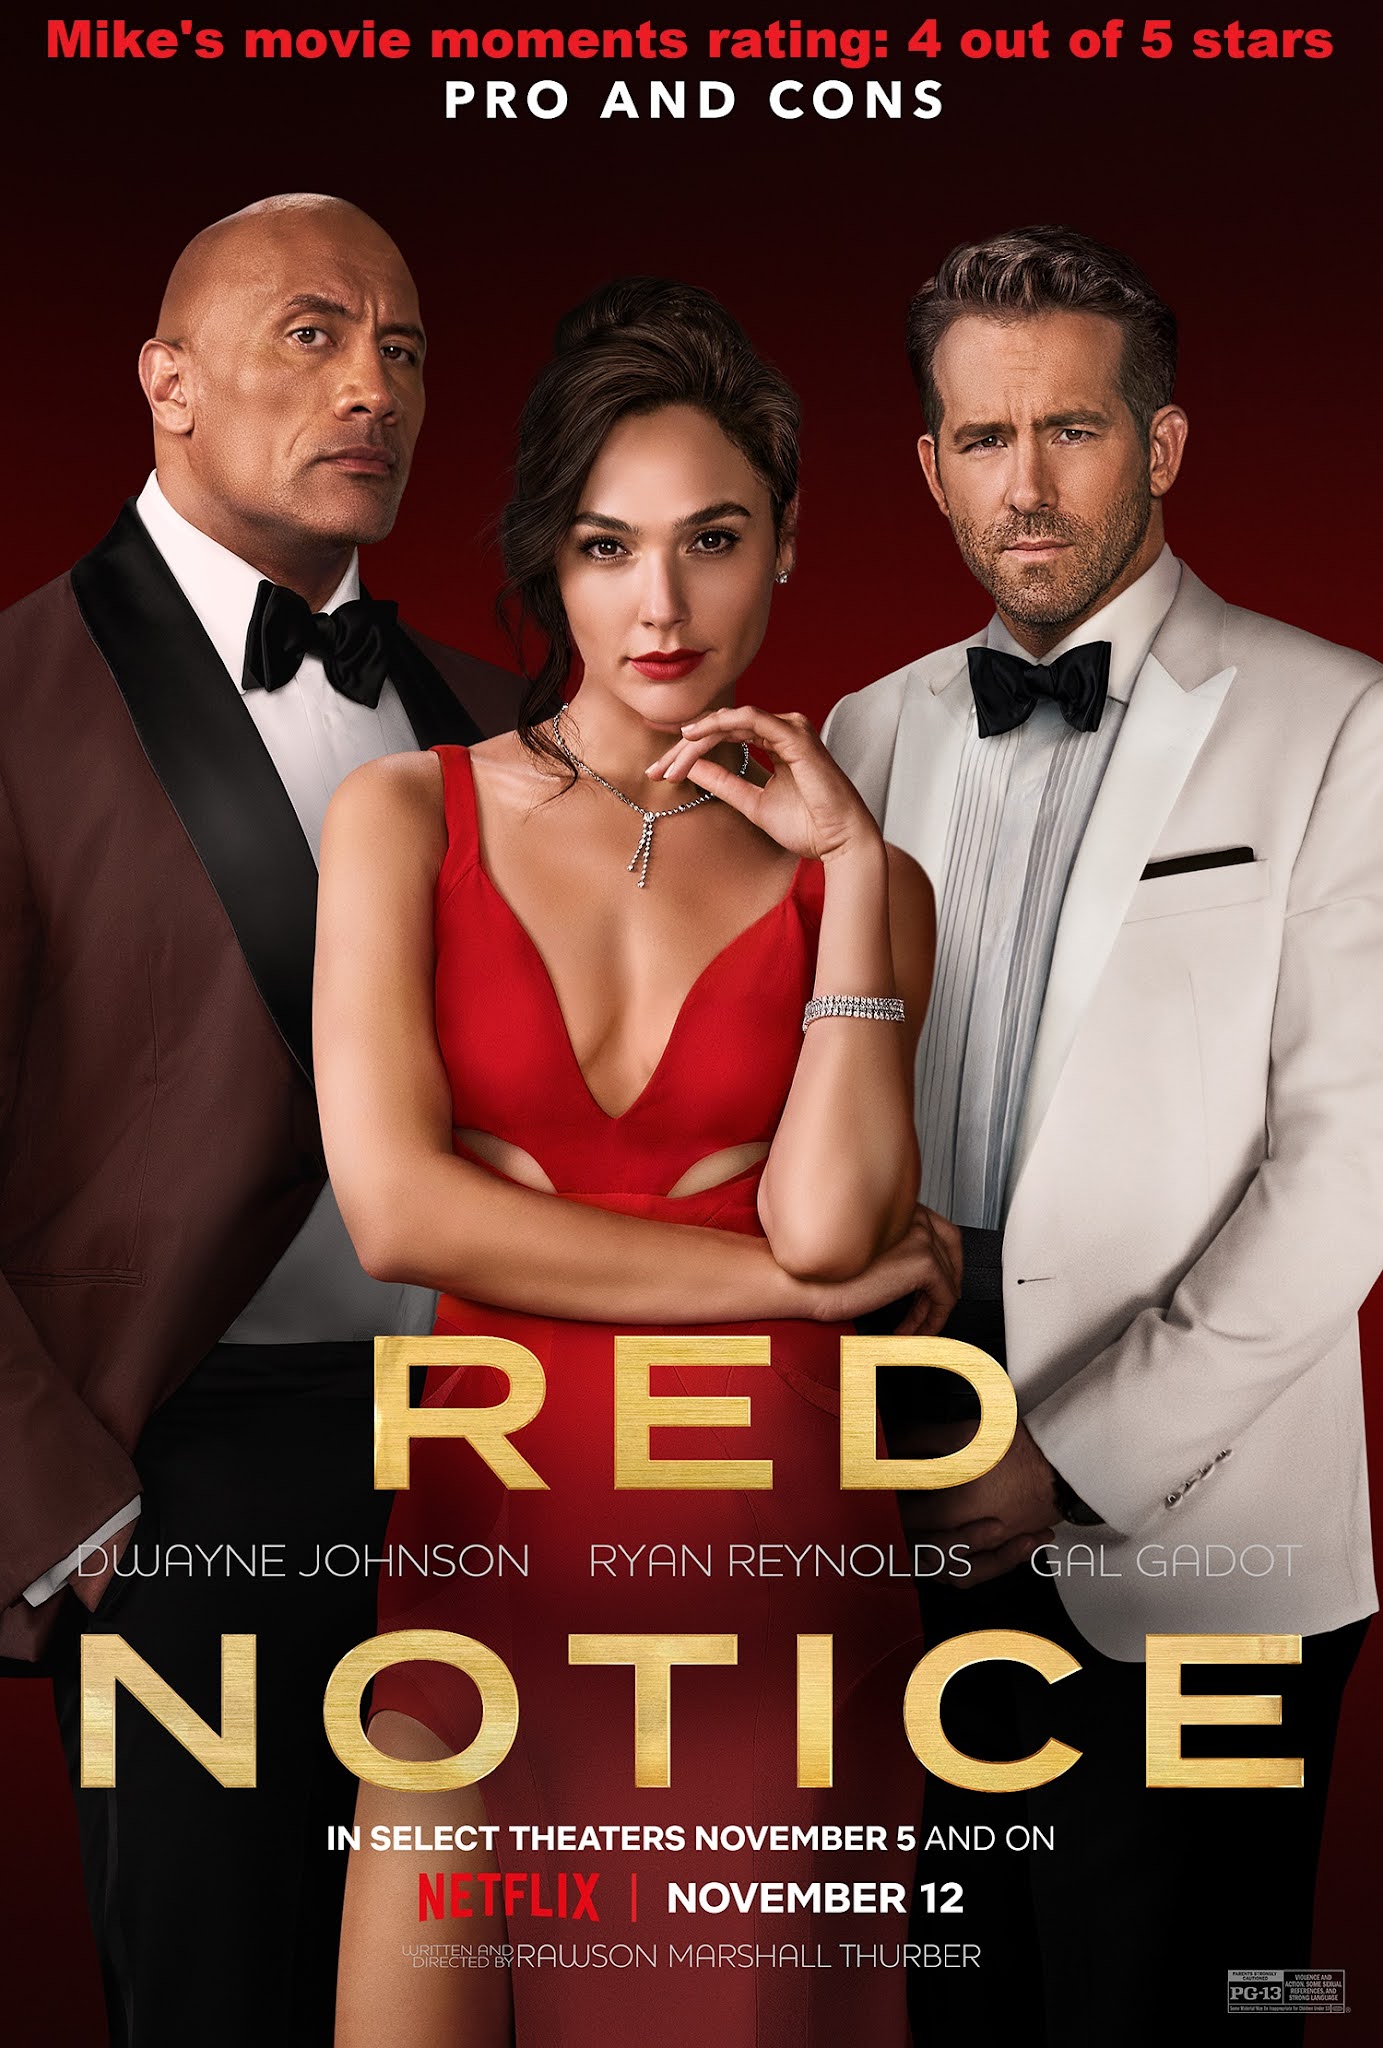 Mike's Movie Moments: Red Notice - A Highly Entertaining Action Comedy Movie